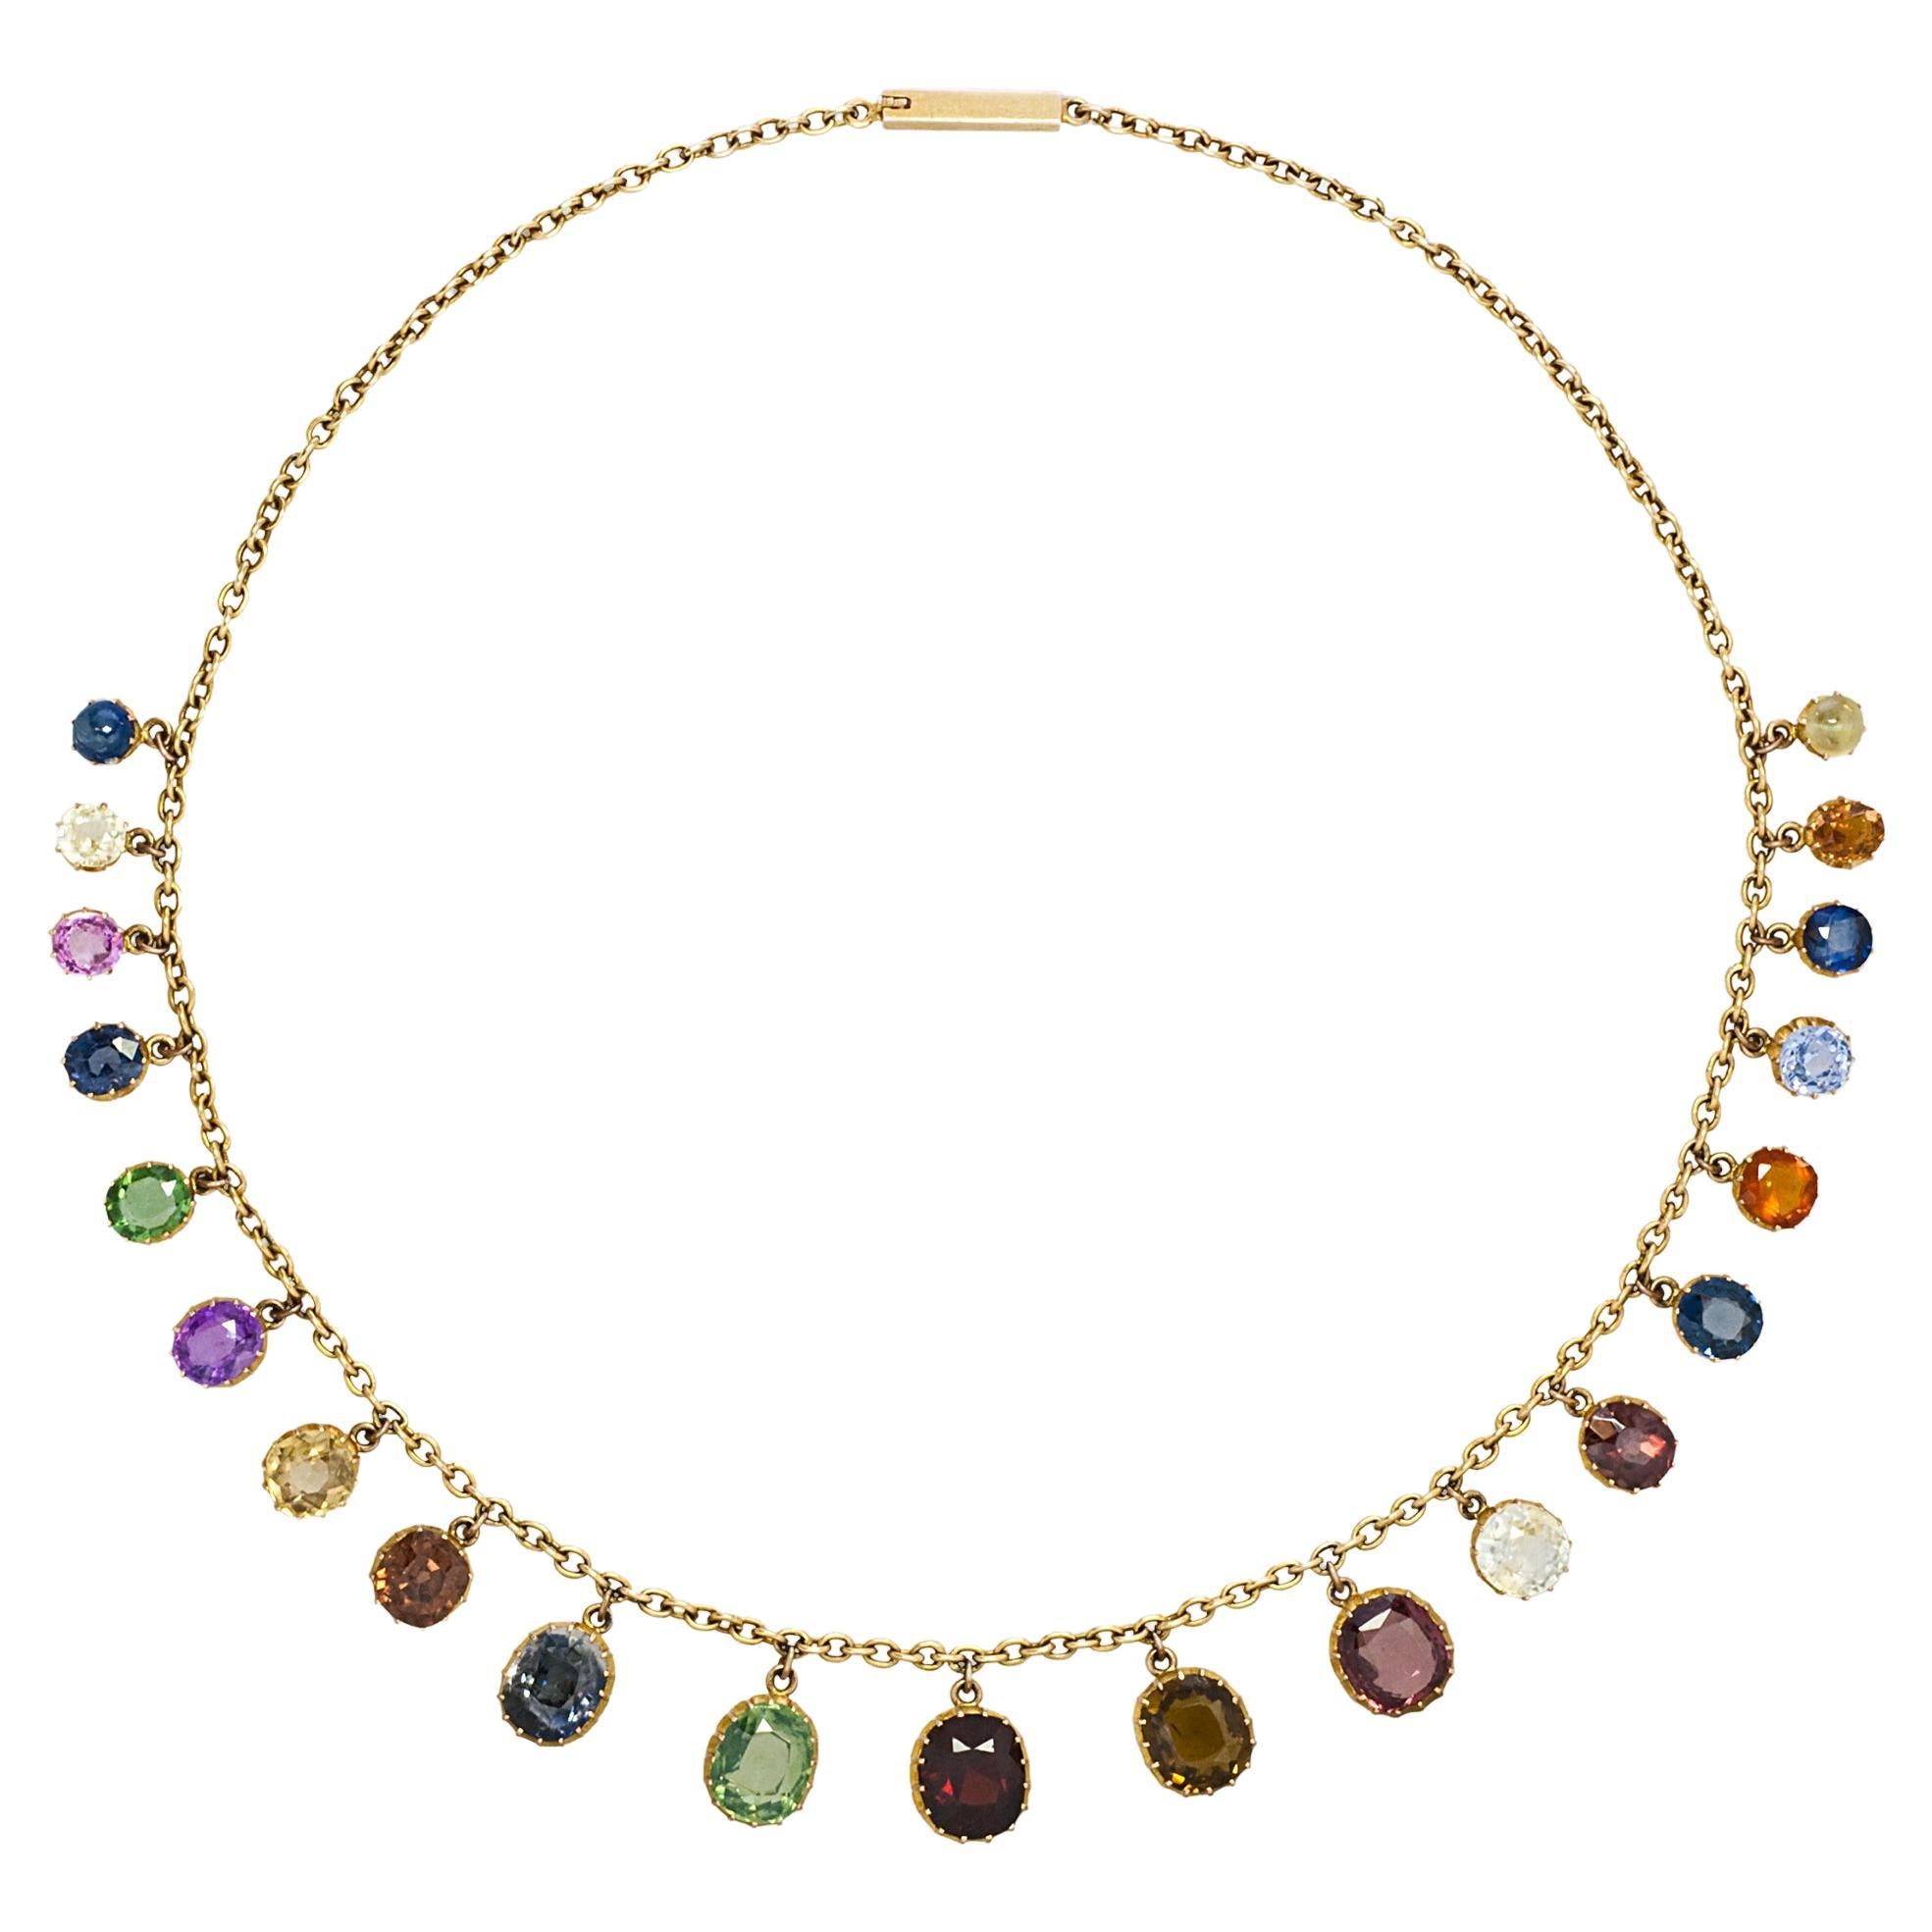 Antique 18K Gold and Multi-Colored Gemset Necklace, Circa 1880